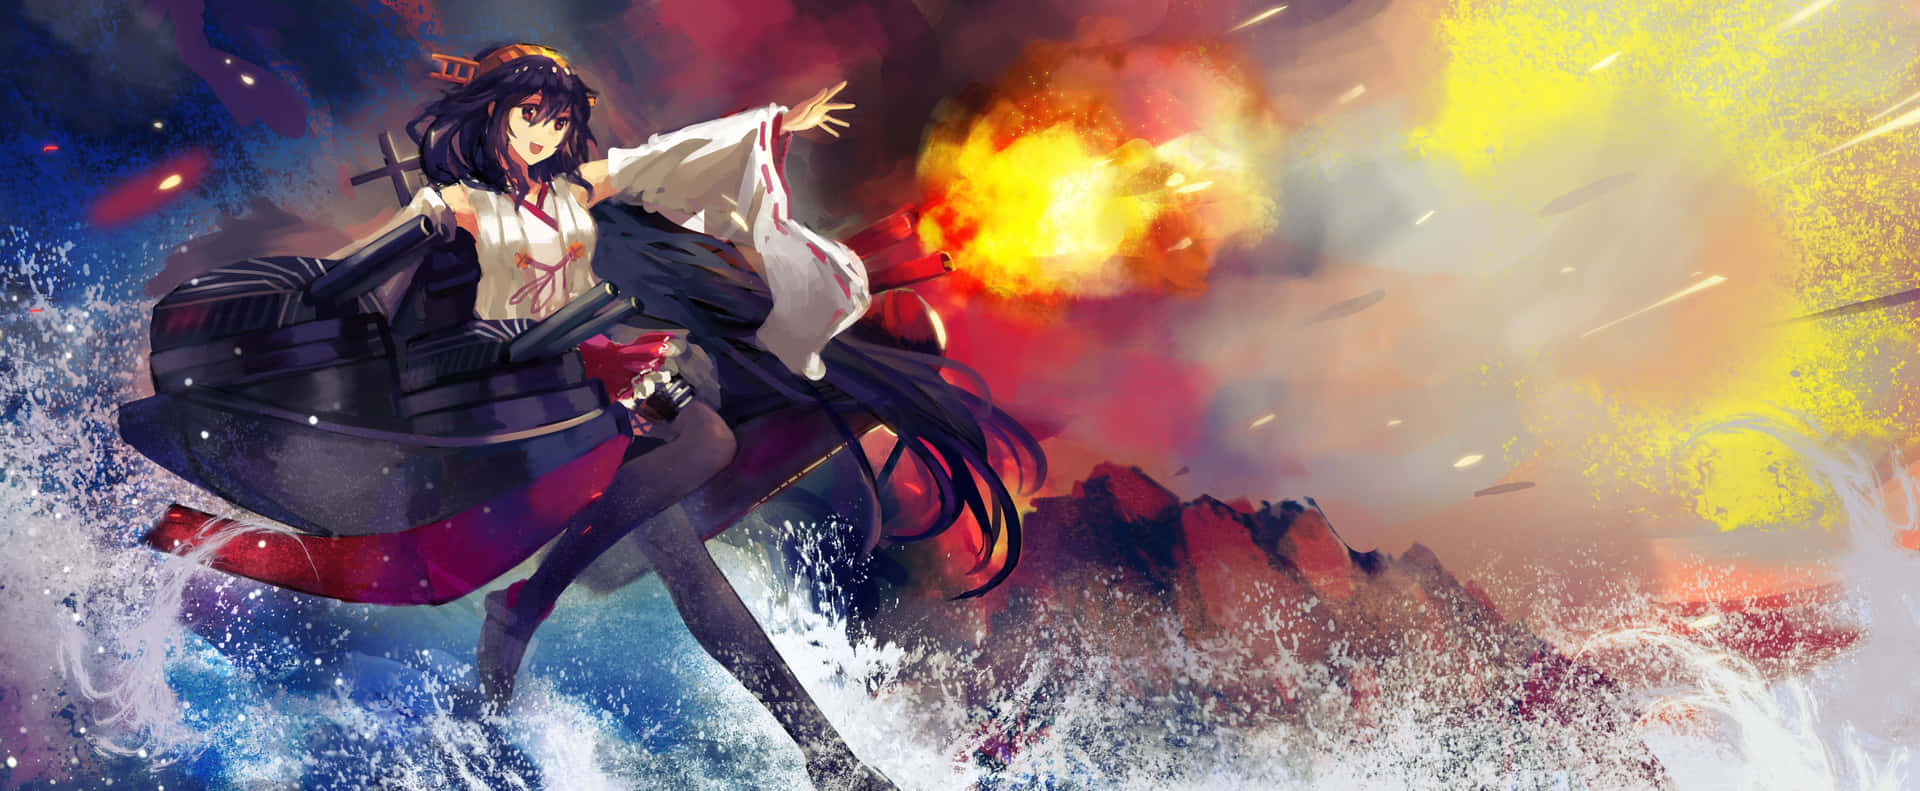 Kancolle, The Fantasy Strategy Mobile Game Background